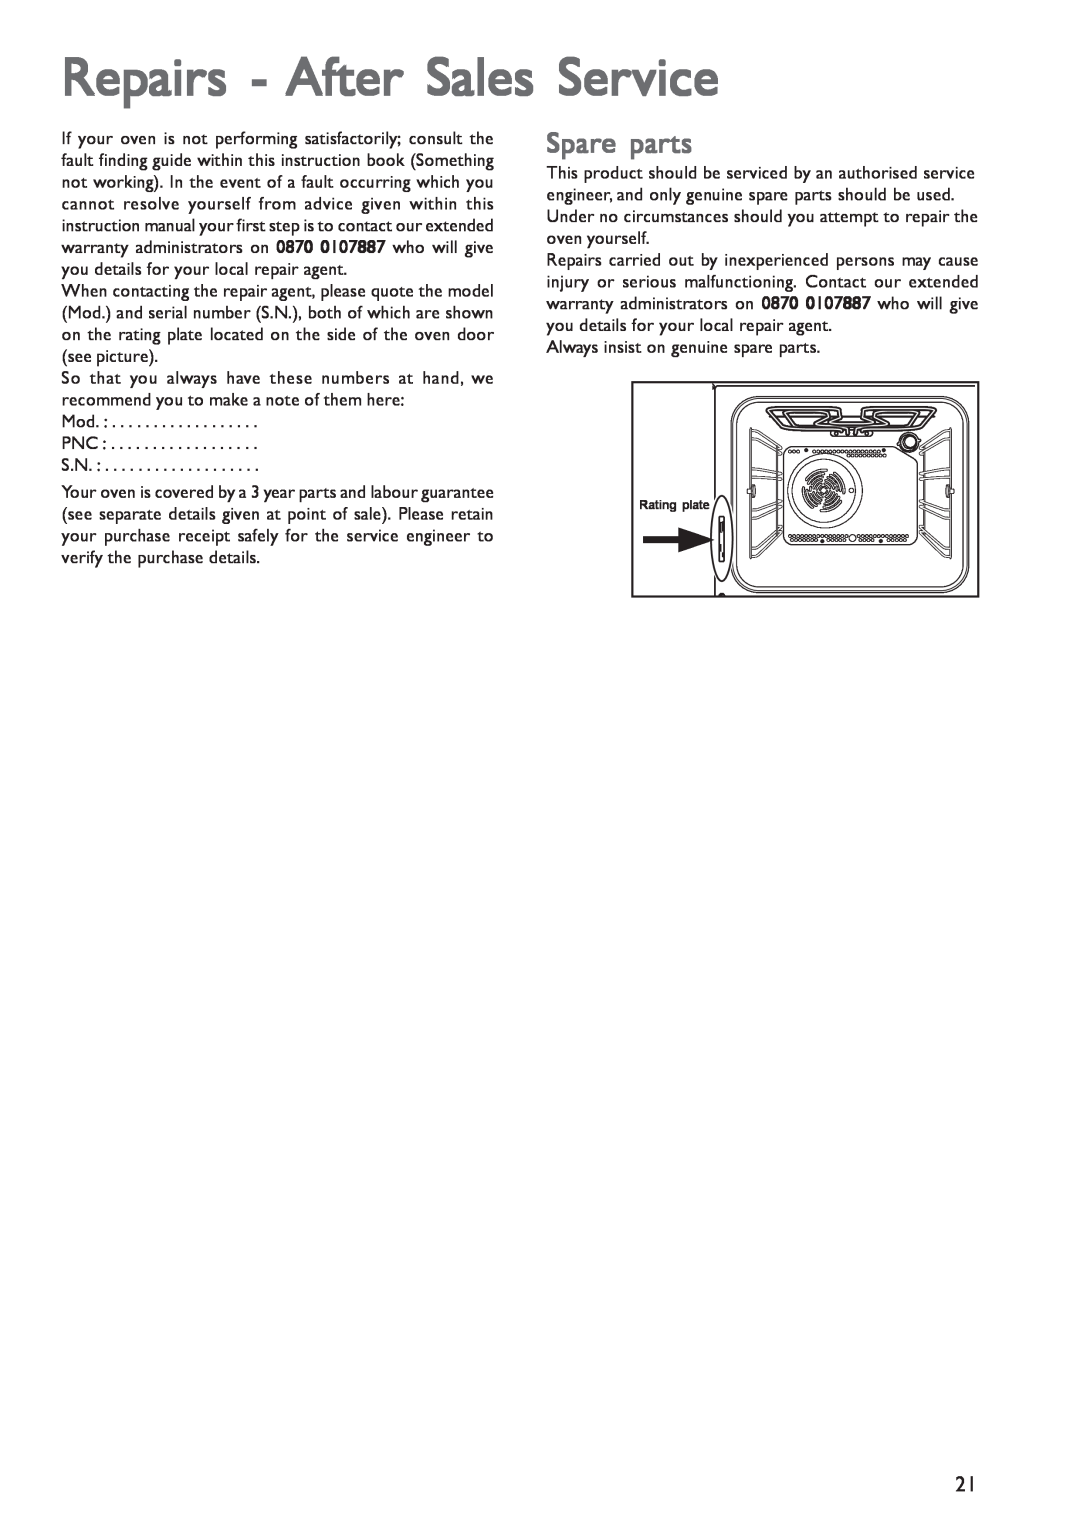 John Lewis JLBIOS601 instruction manual Repairs - After Sales Service, Spare parts 